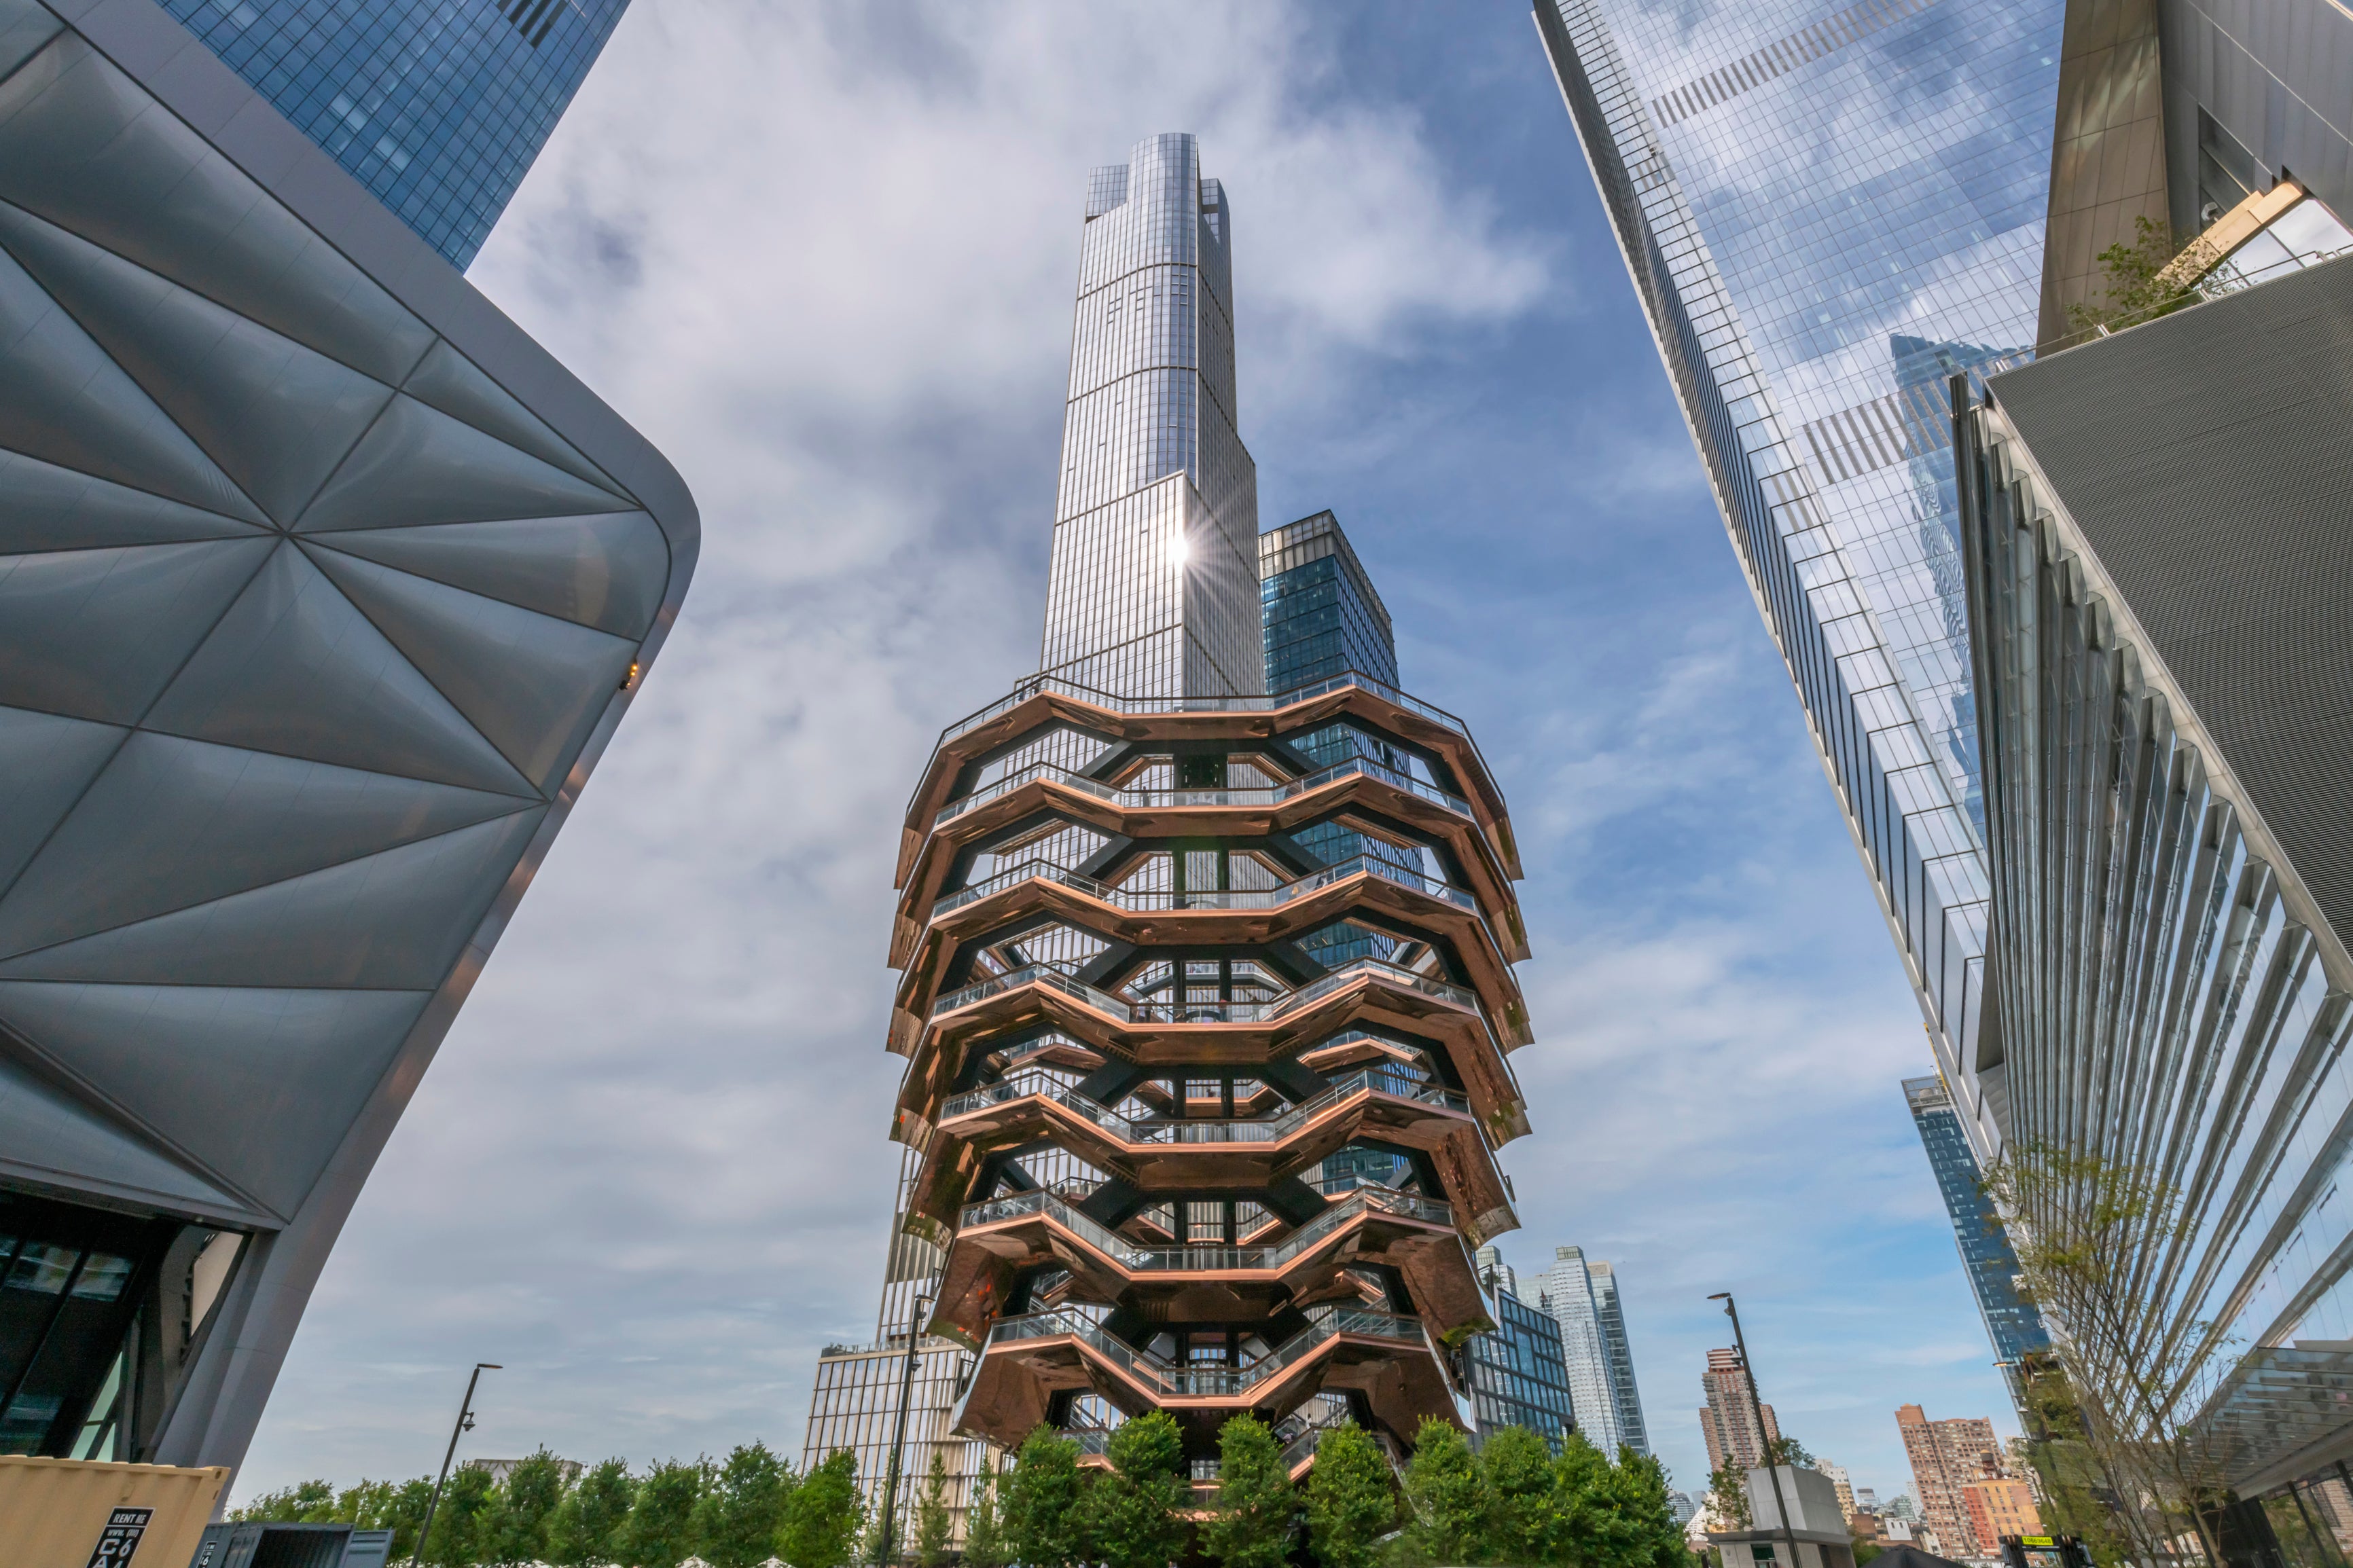 Hudson Yards Nyc The Vessel And Skyscrapers Richard Silver Photo